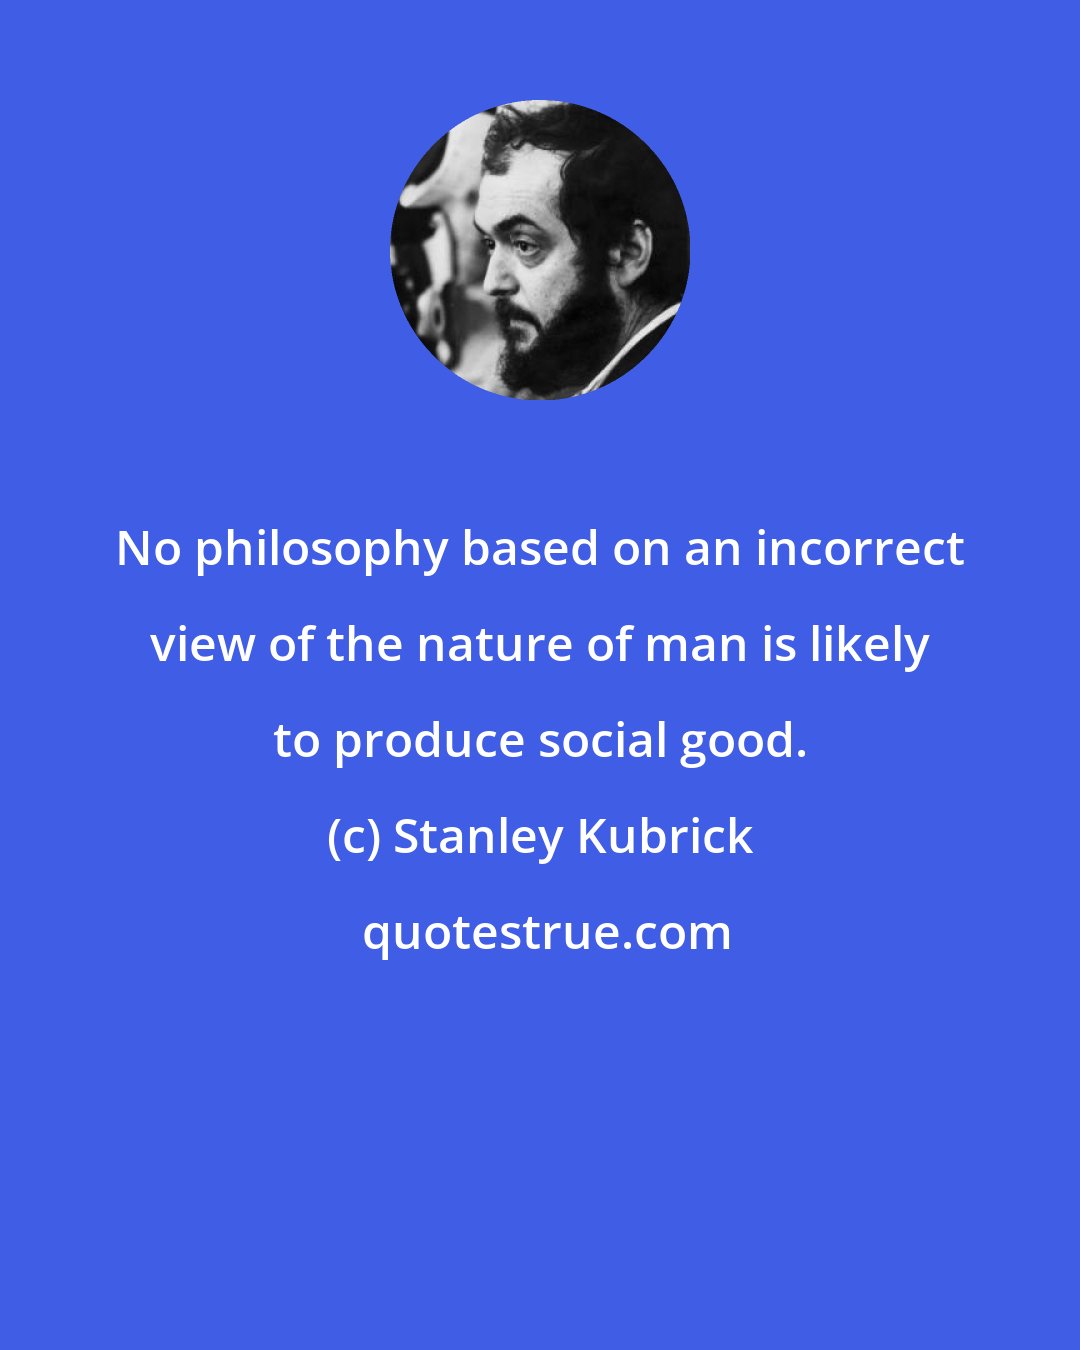 Stanley Kubrick: No philosophy based on an incorrect view of the nature of man is likely to produce social good.